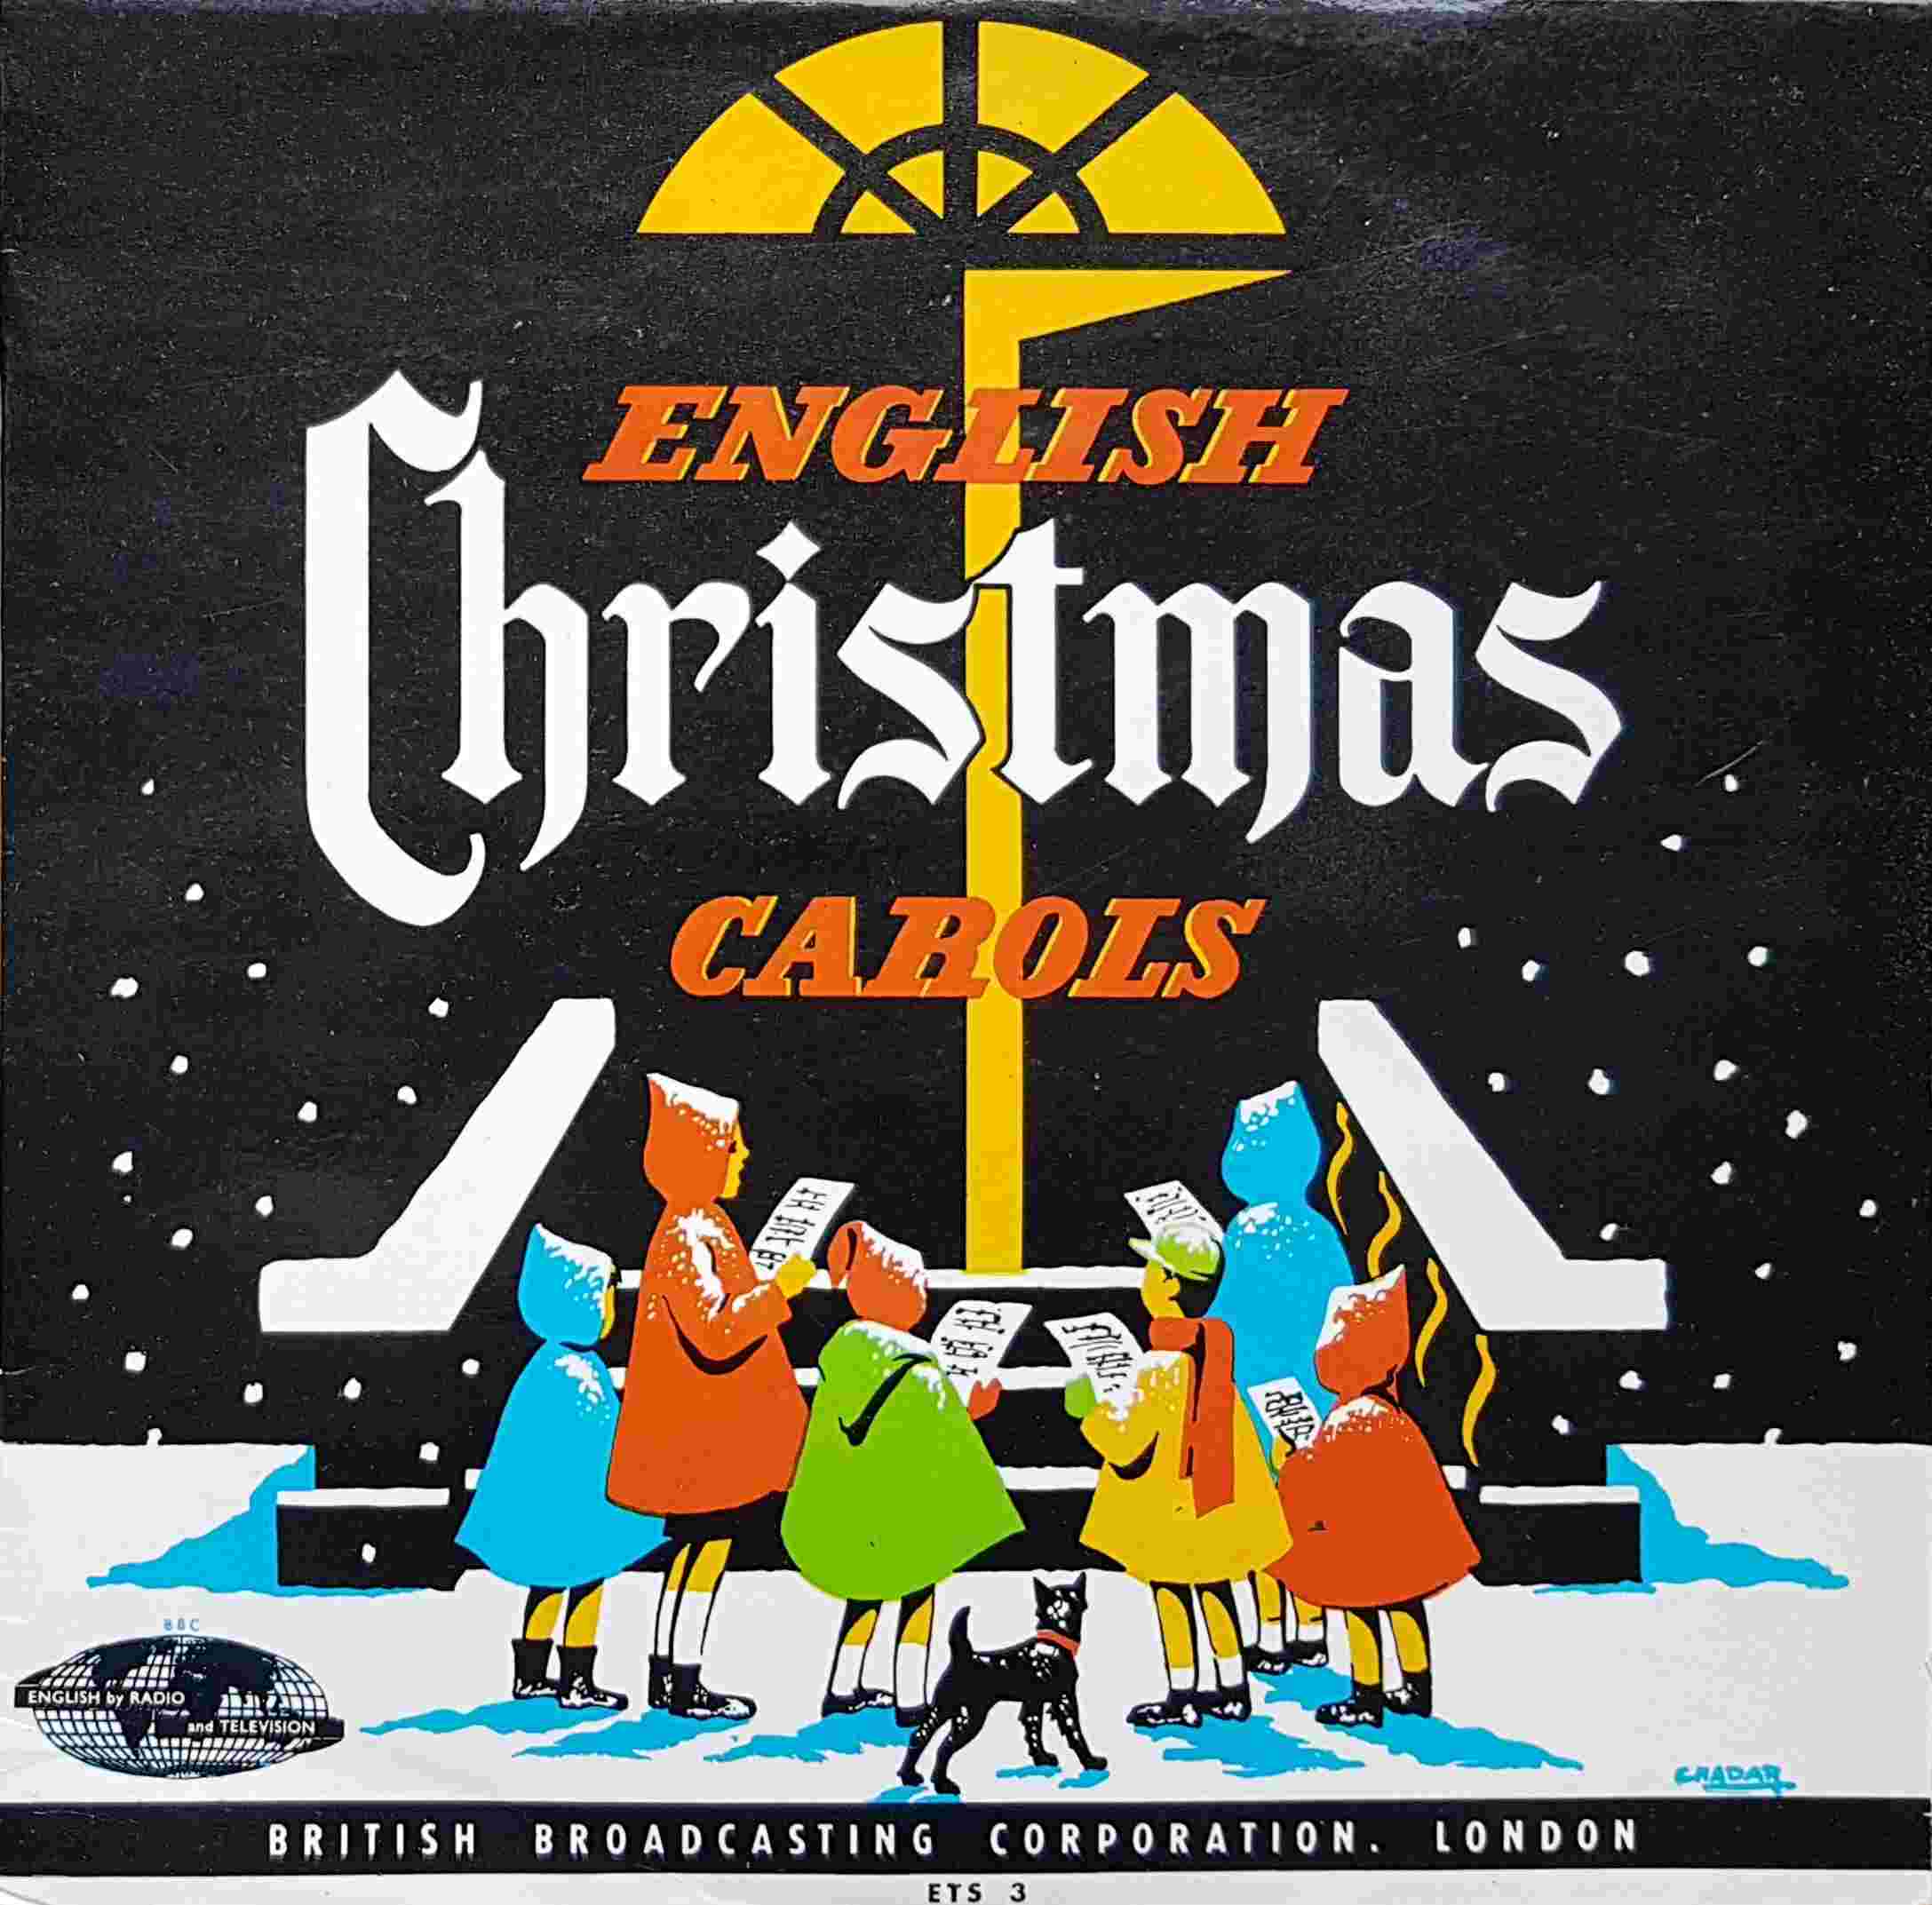 Picture of Christmas carols by artist Choir of King's College, Cambridge from the BBC 10inches - Records and Tapes library